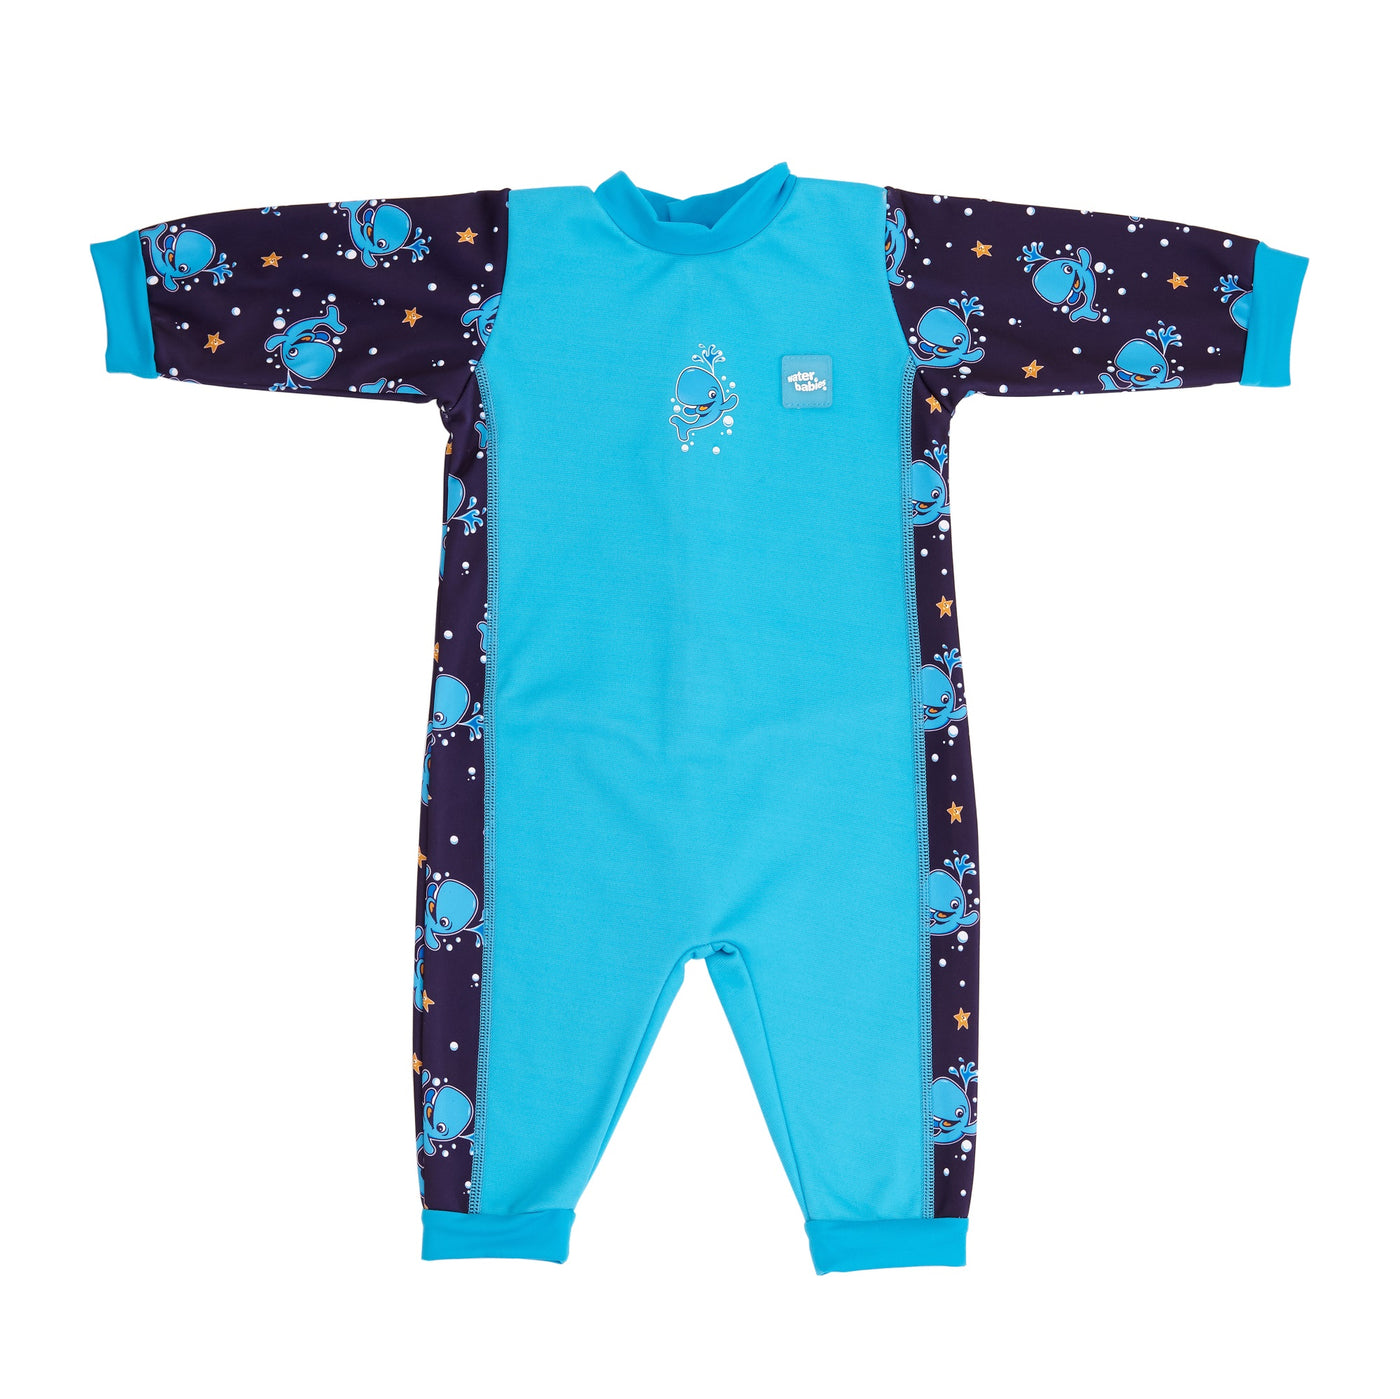 Warm baby wetsuit in blue Bubba the Whale print